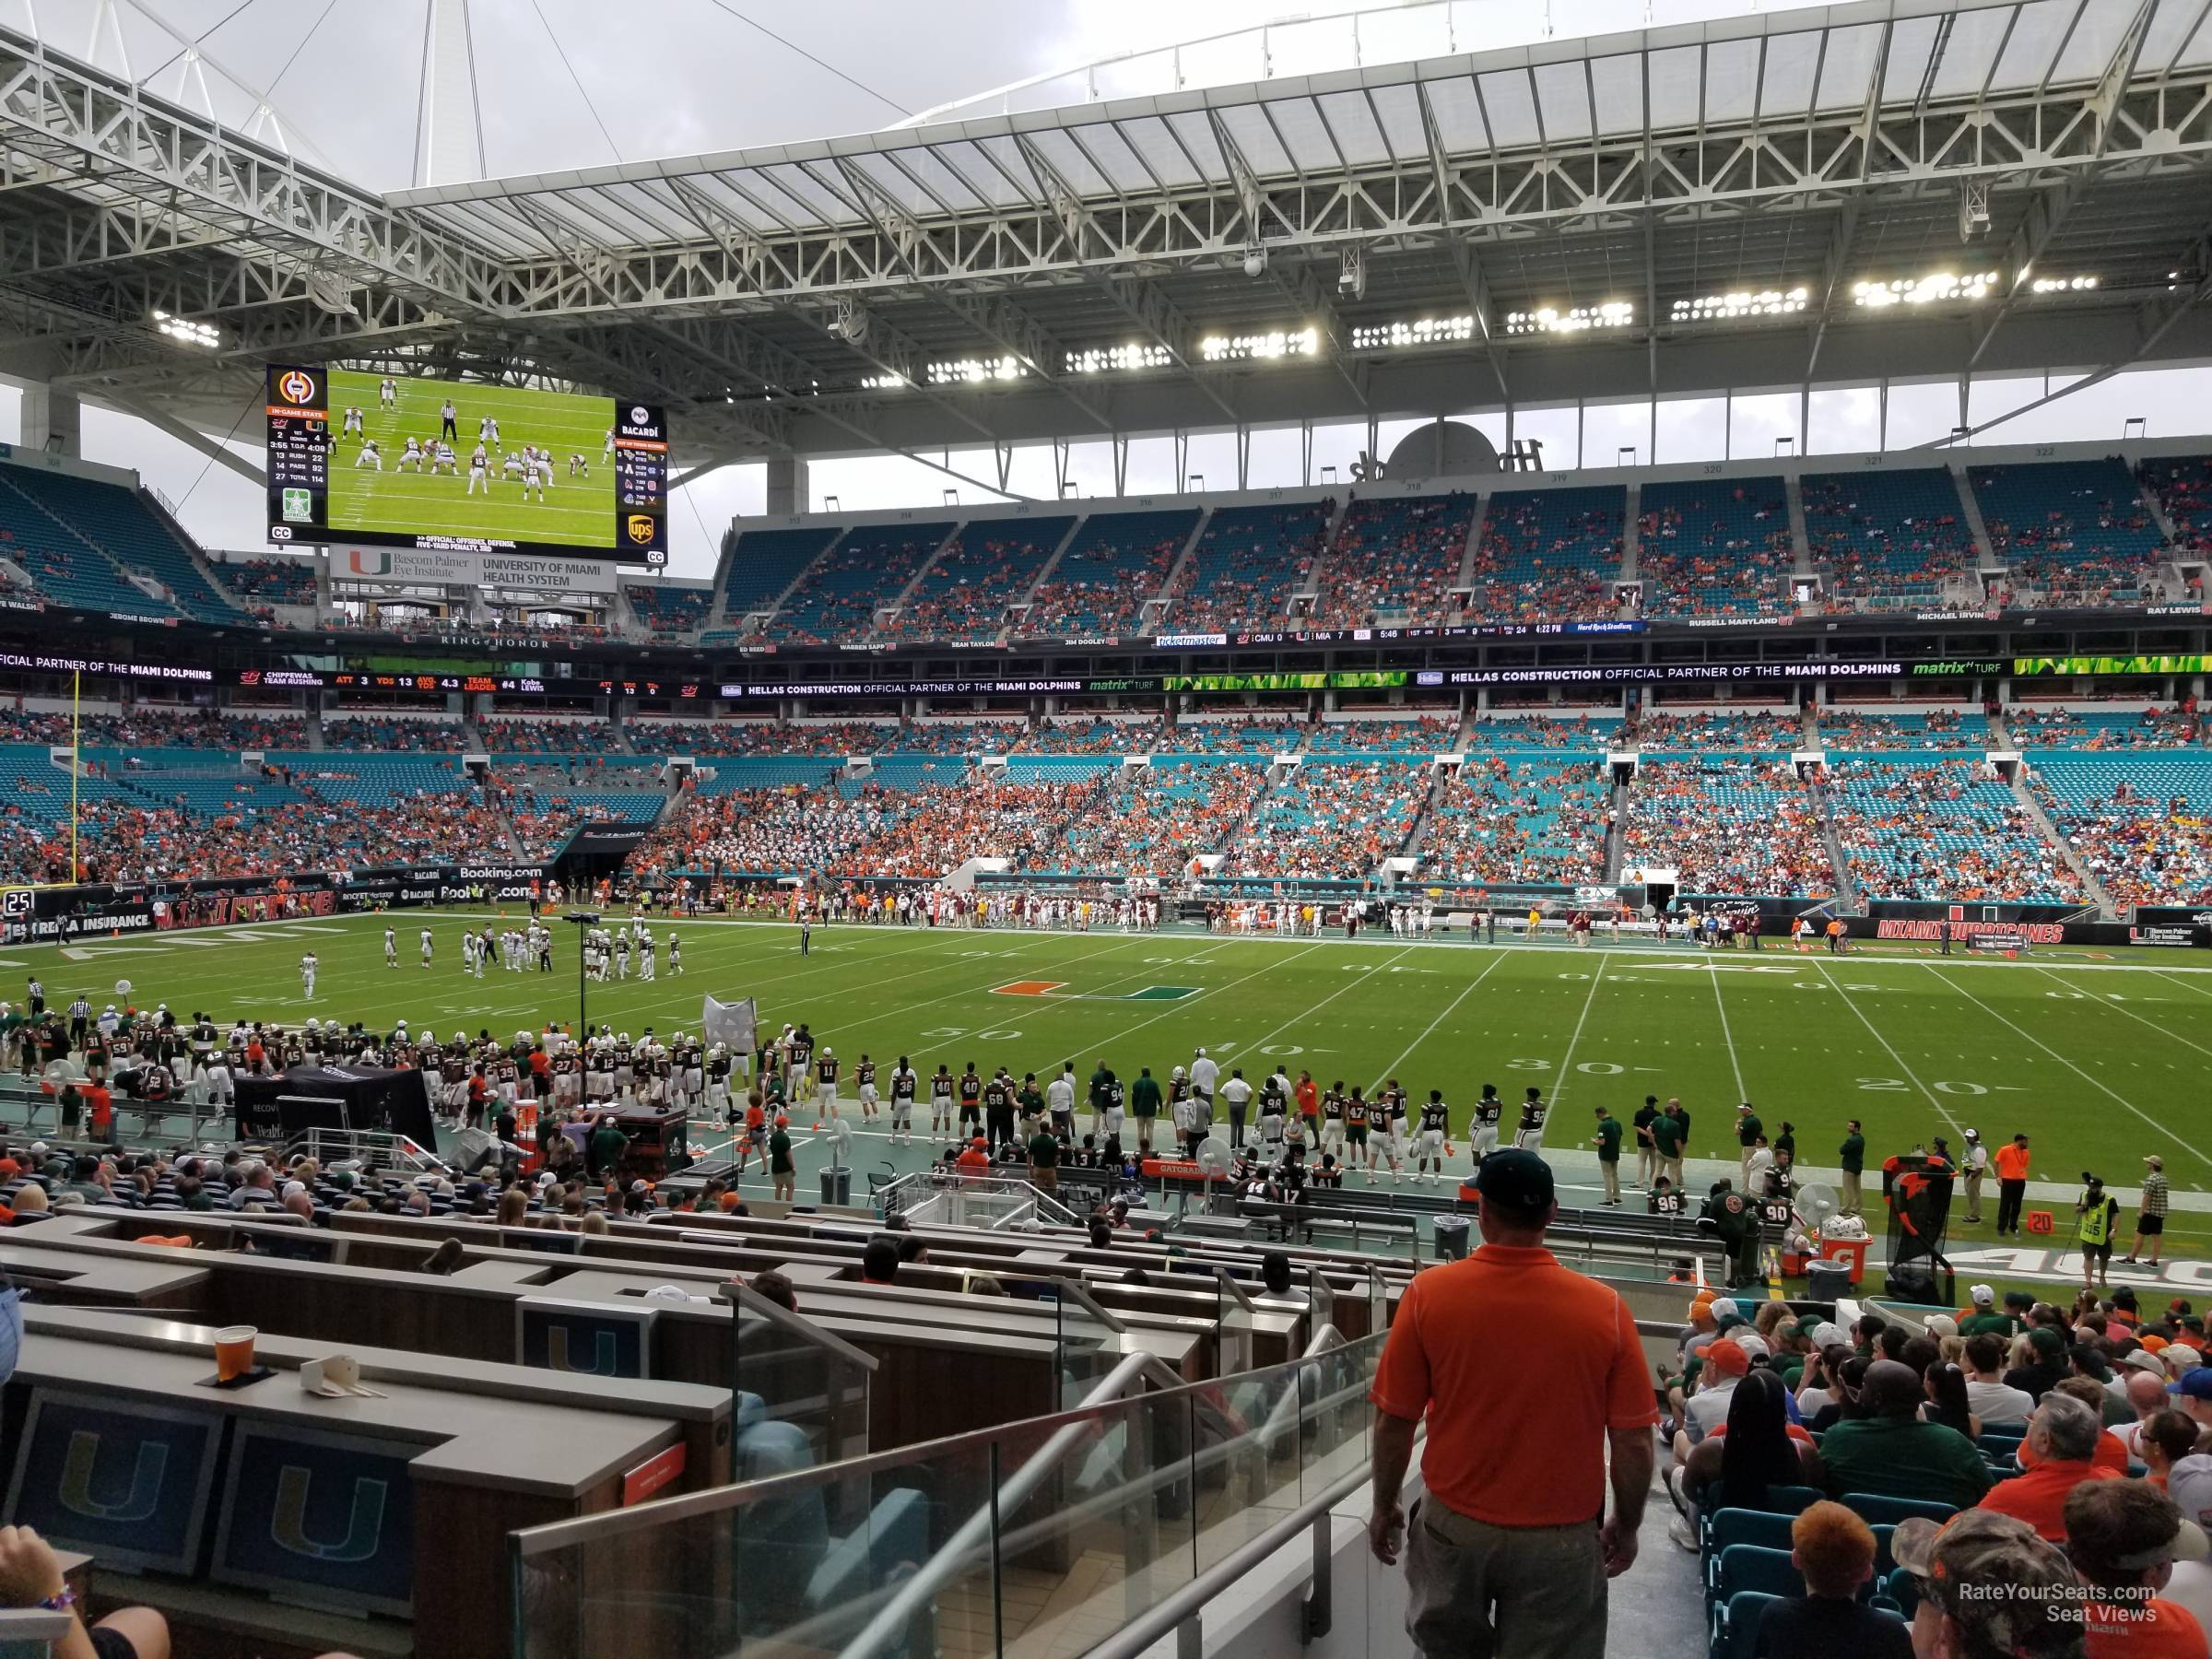 section 144, row 29w seat view  for football - hard rock stadium